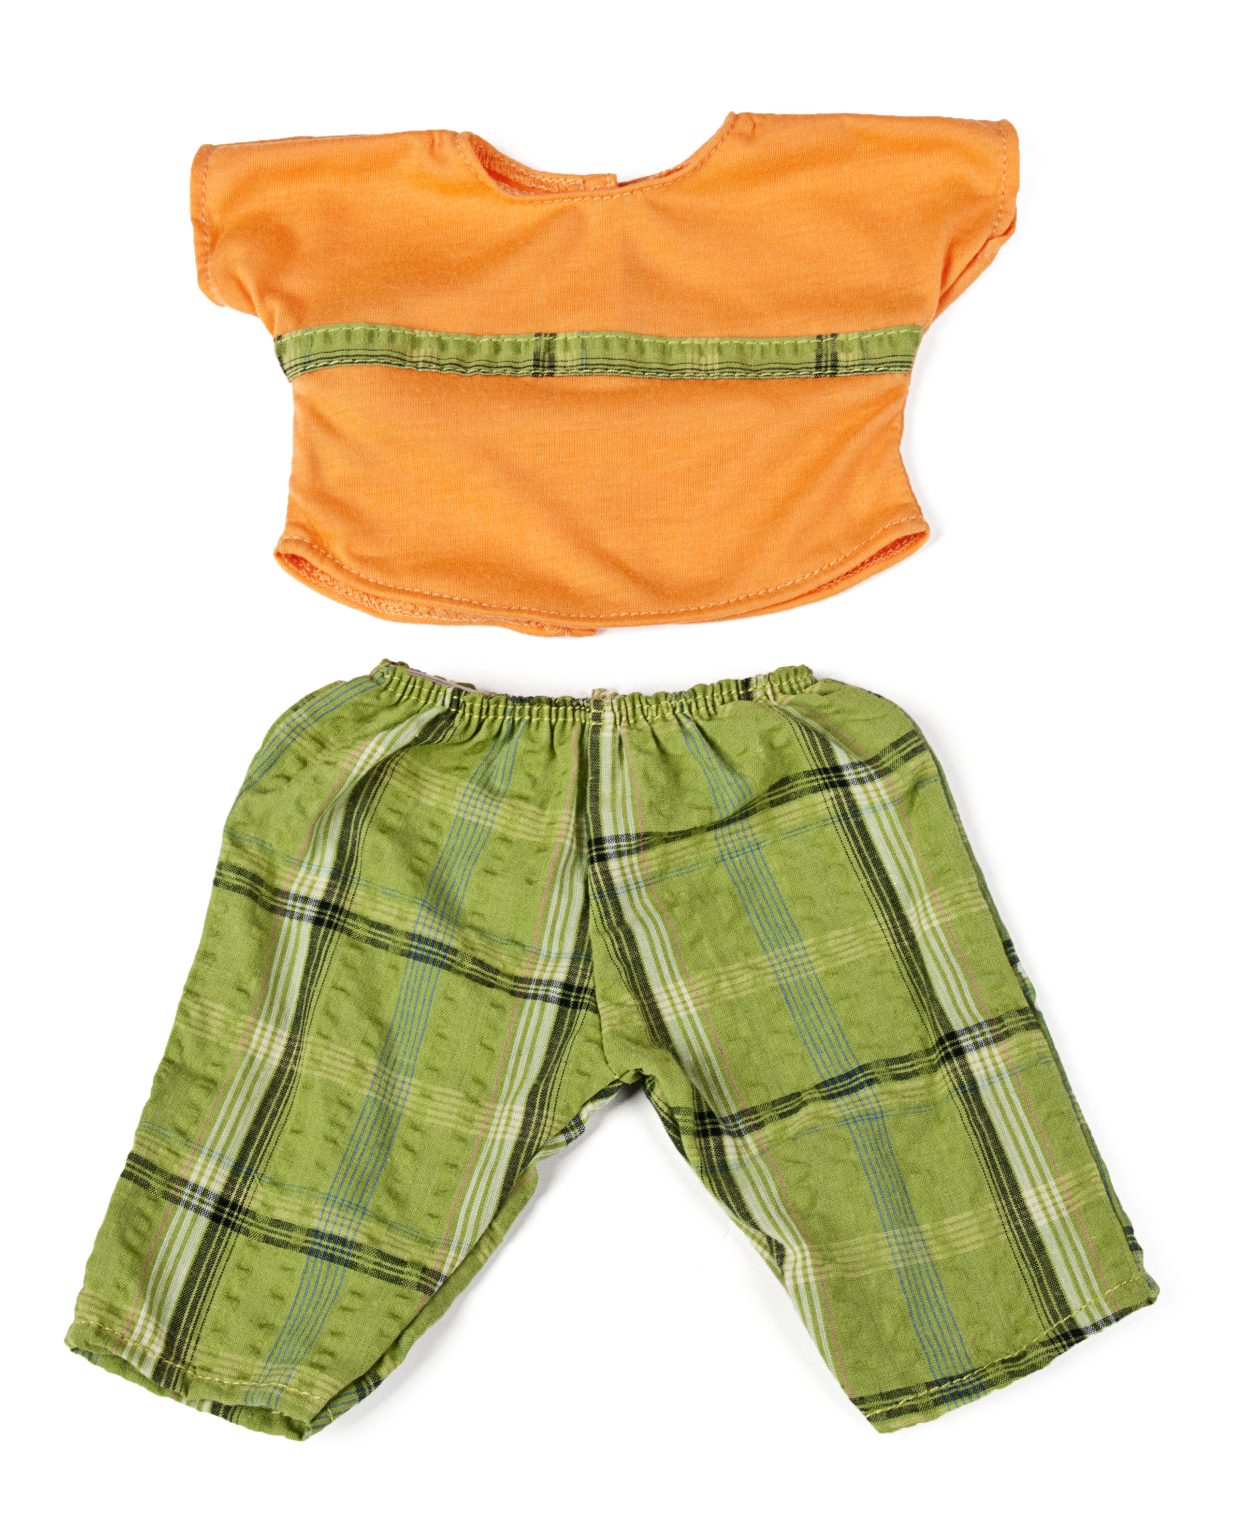 Wholesale Orange Shirt and Green Trousers Set(24x.91)